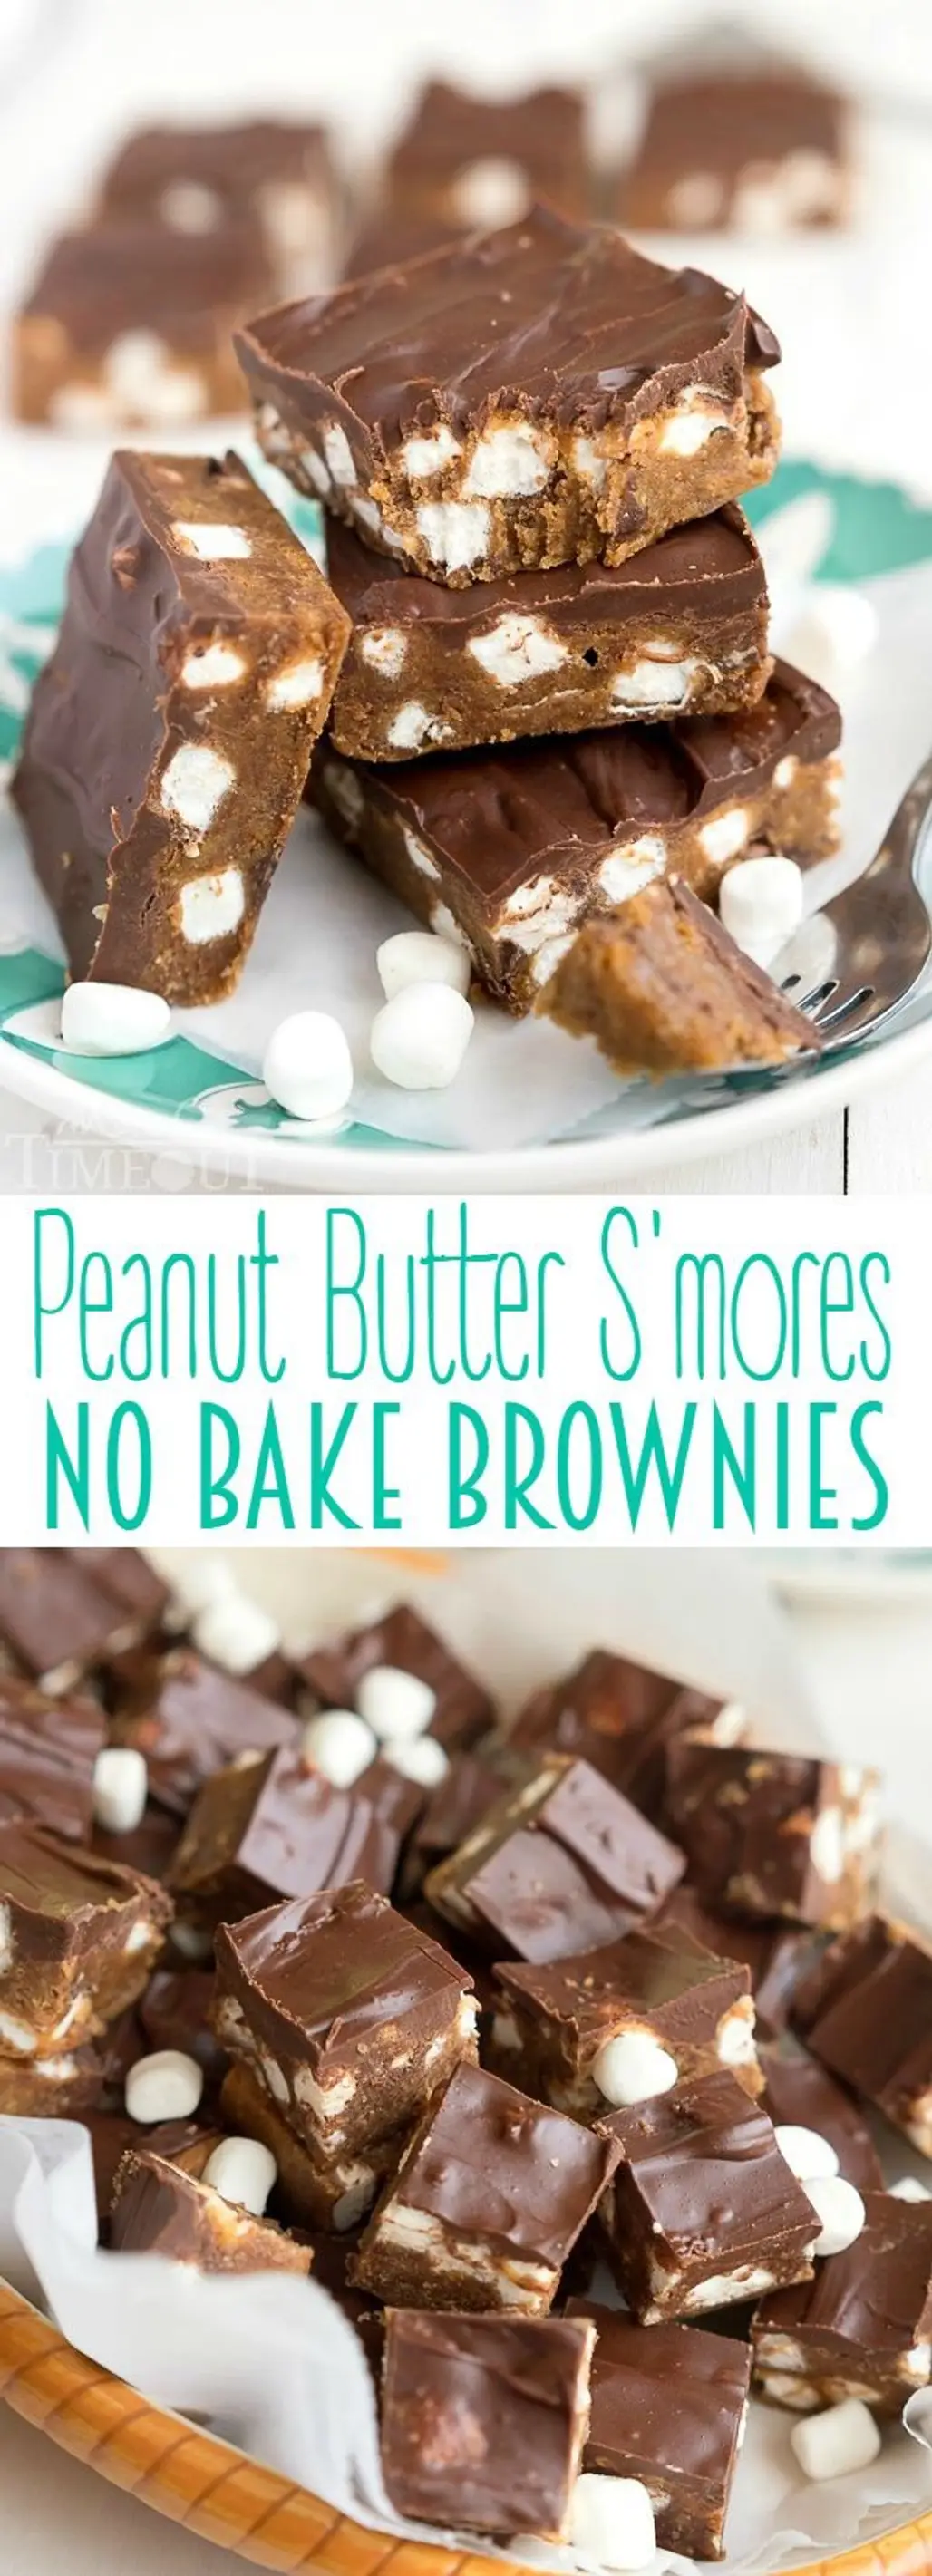 Peanut Butter S'mores No Bake Brownies